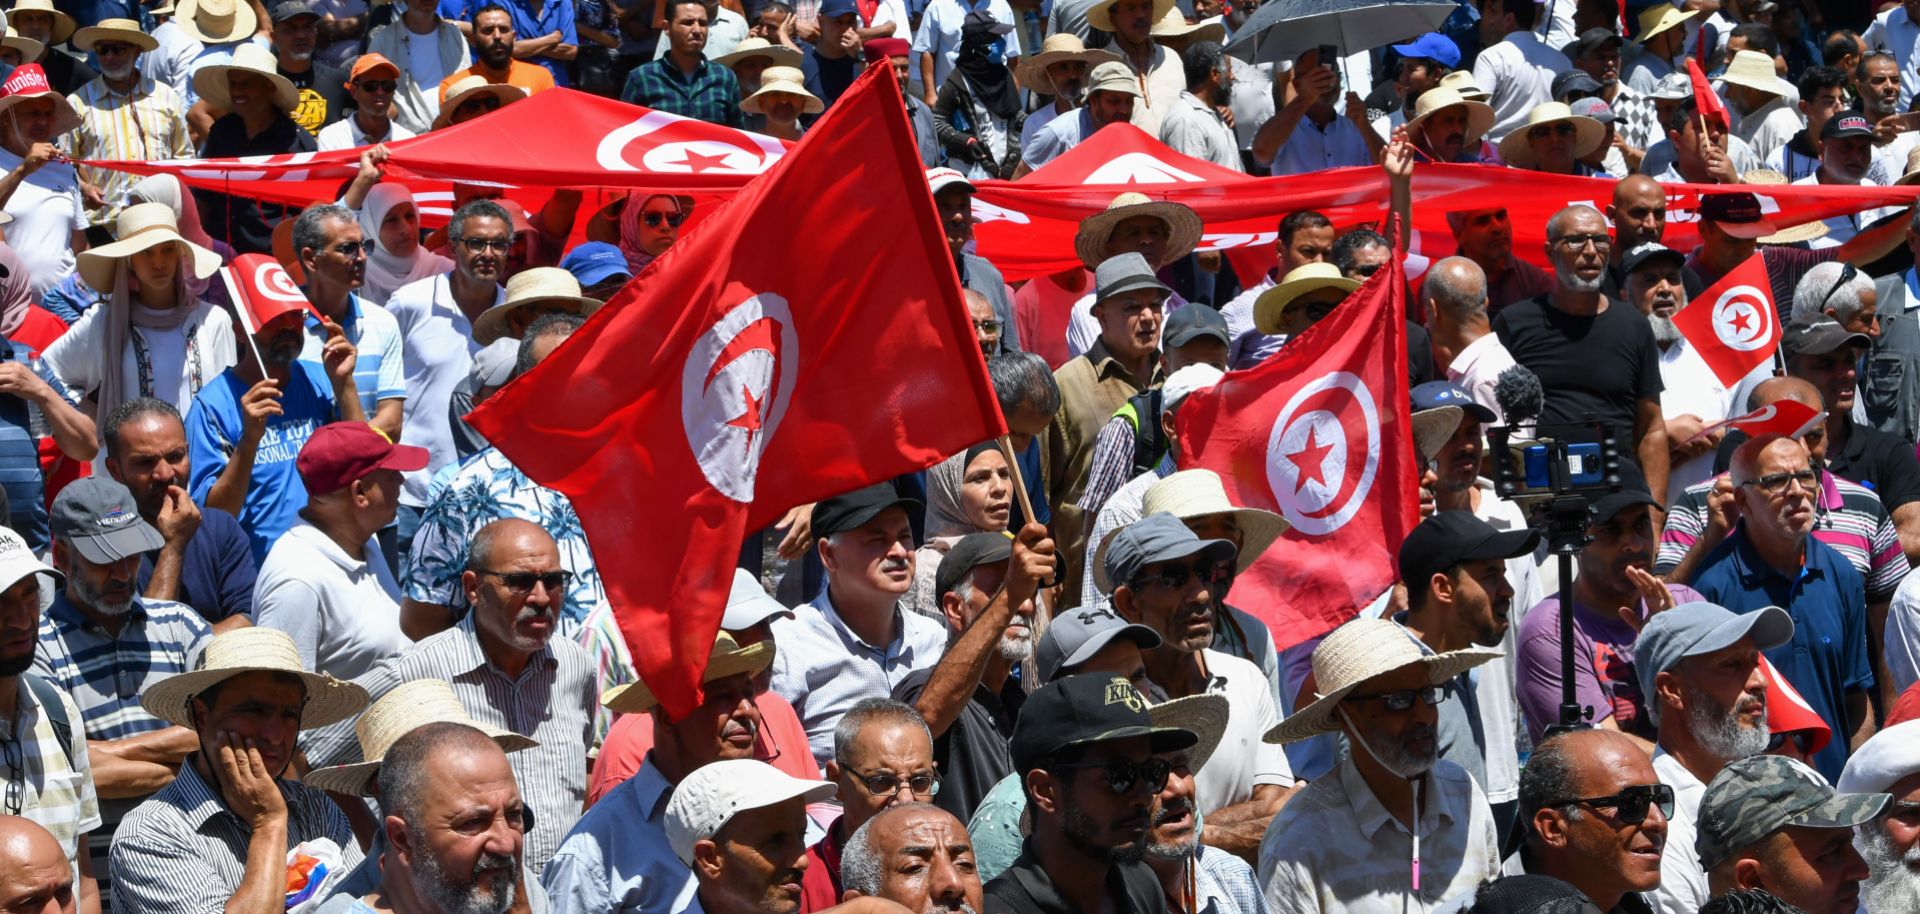 Demonstrators in Tunis, Tunisia, lift national flags during a protest on June 19, 2022, against President Kais Saied and the country’s upcoming constitutional referendum. 